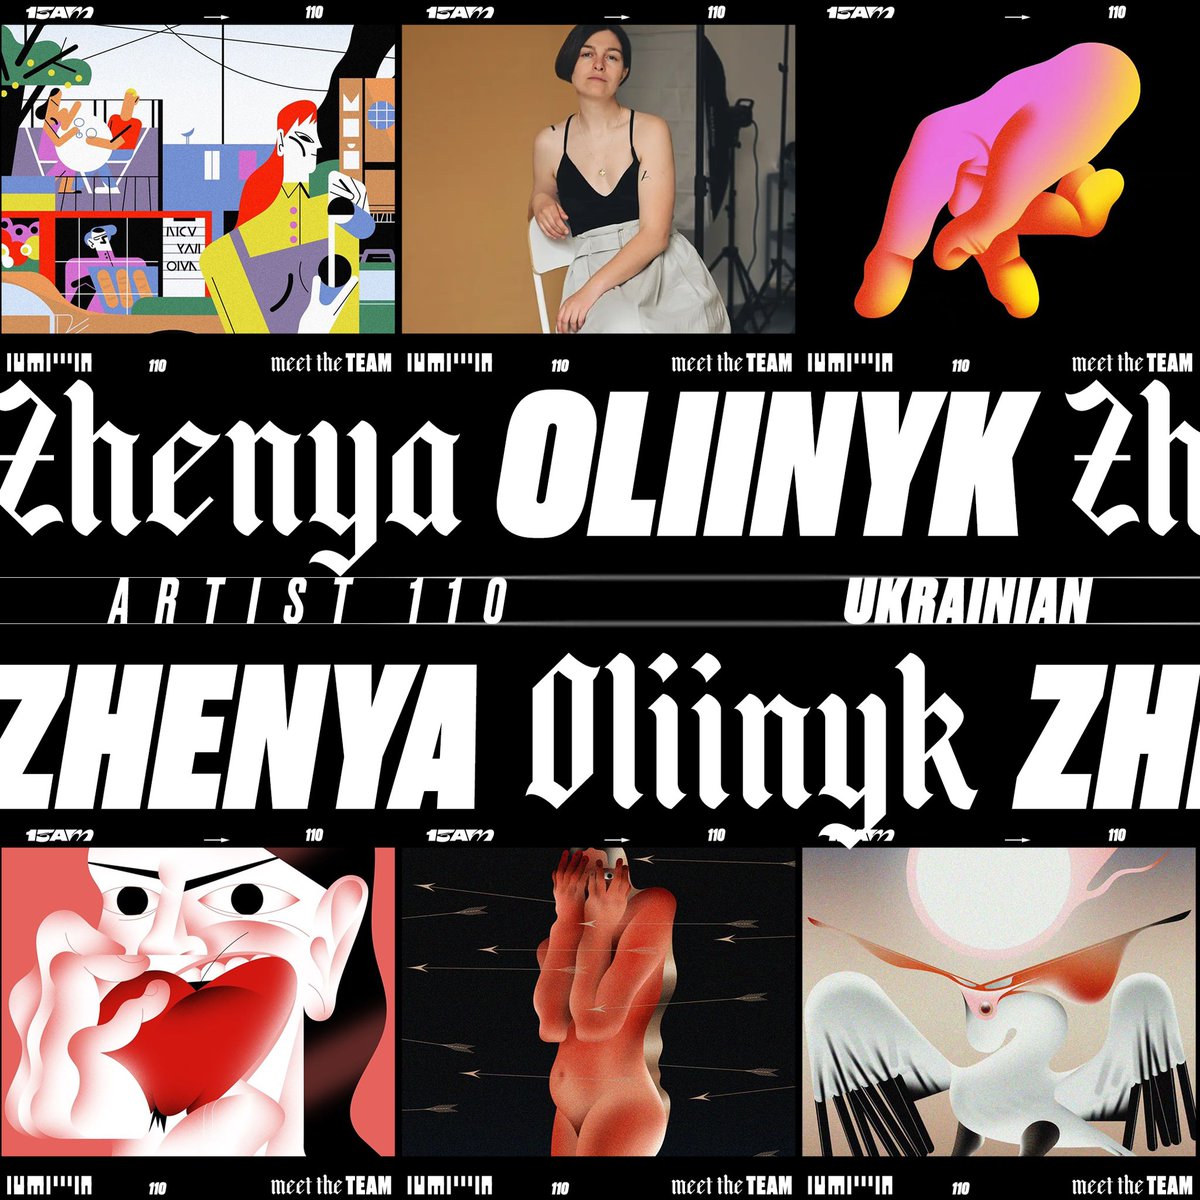 Meet the Team. Artist 110 - @zhenya_oliinyk Zhenya specializes in commercial and editorial illustration, graphic journalism, and publishing, with a focus on human rights, equality, feminism, history, trauma, mental health, and other complex social topics.